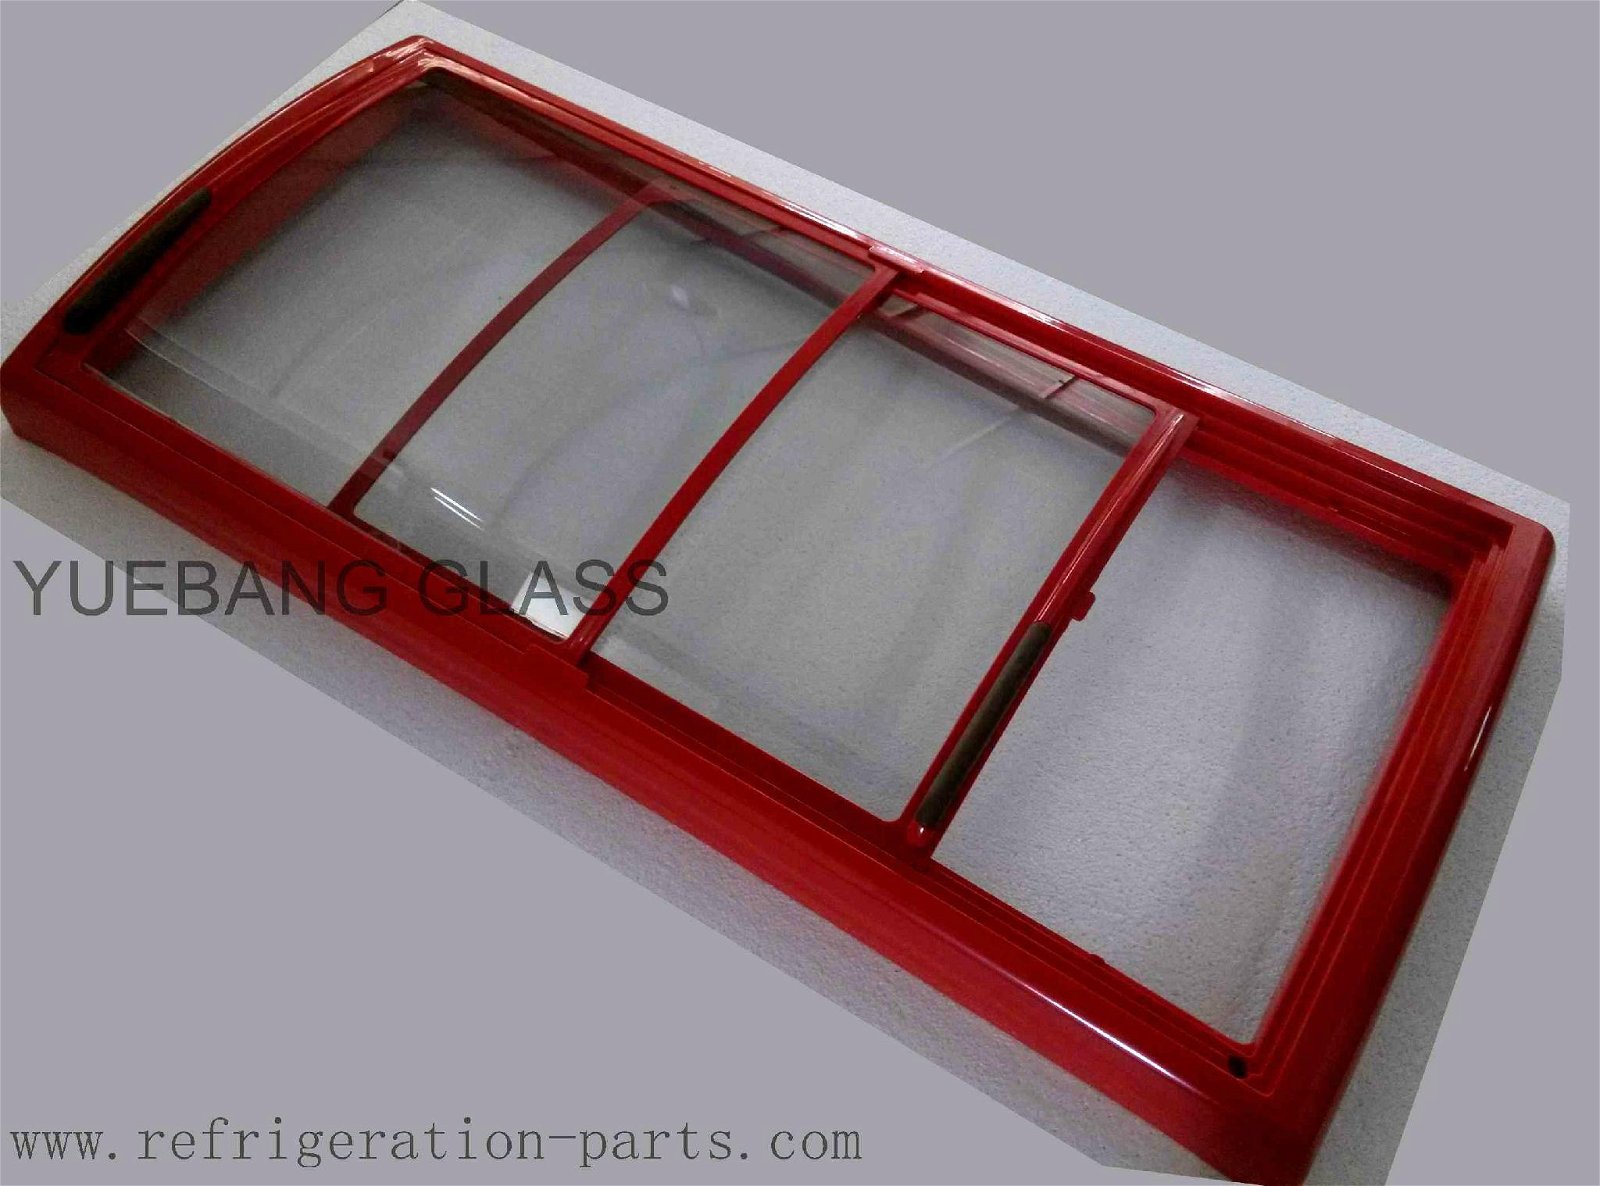 Whole ABS Injetion Glass Door for chest freezer 5